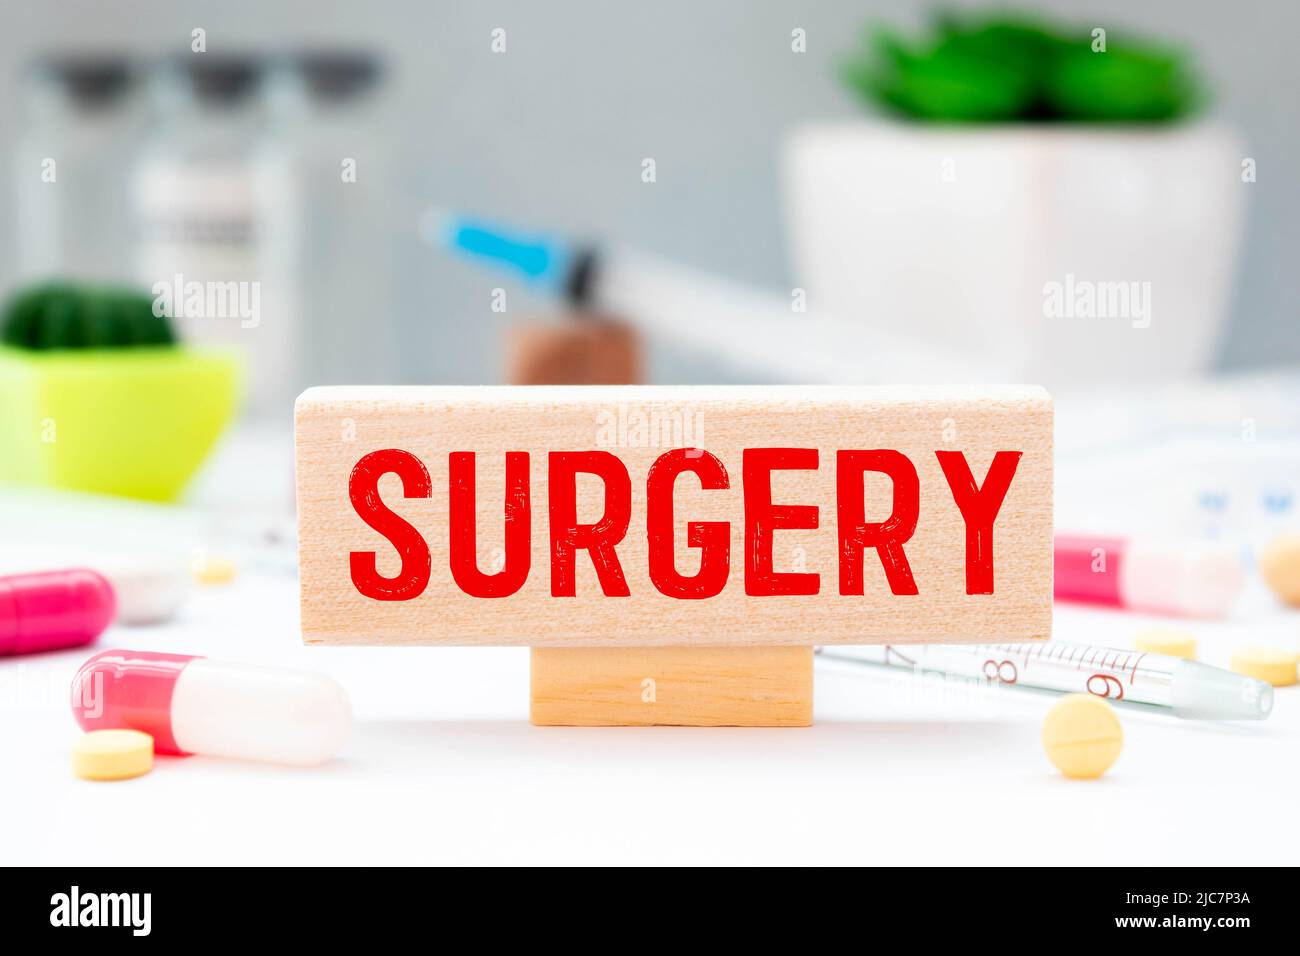 The word SURGERY is written on wooden cubes near a stethoscope on a wooden background. Stock Photo